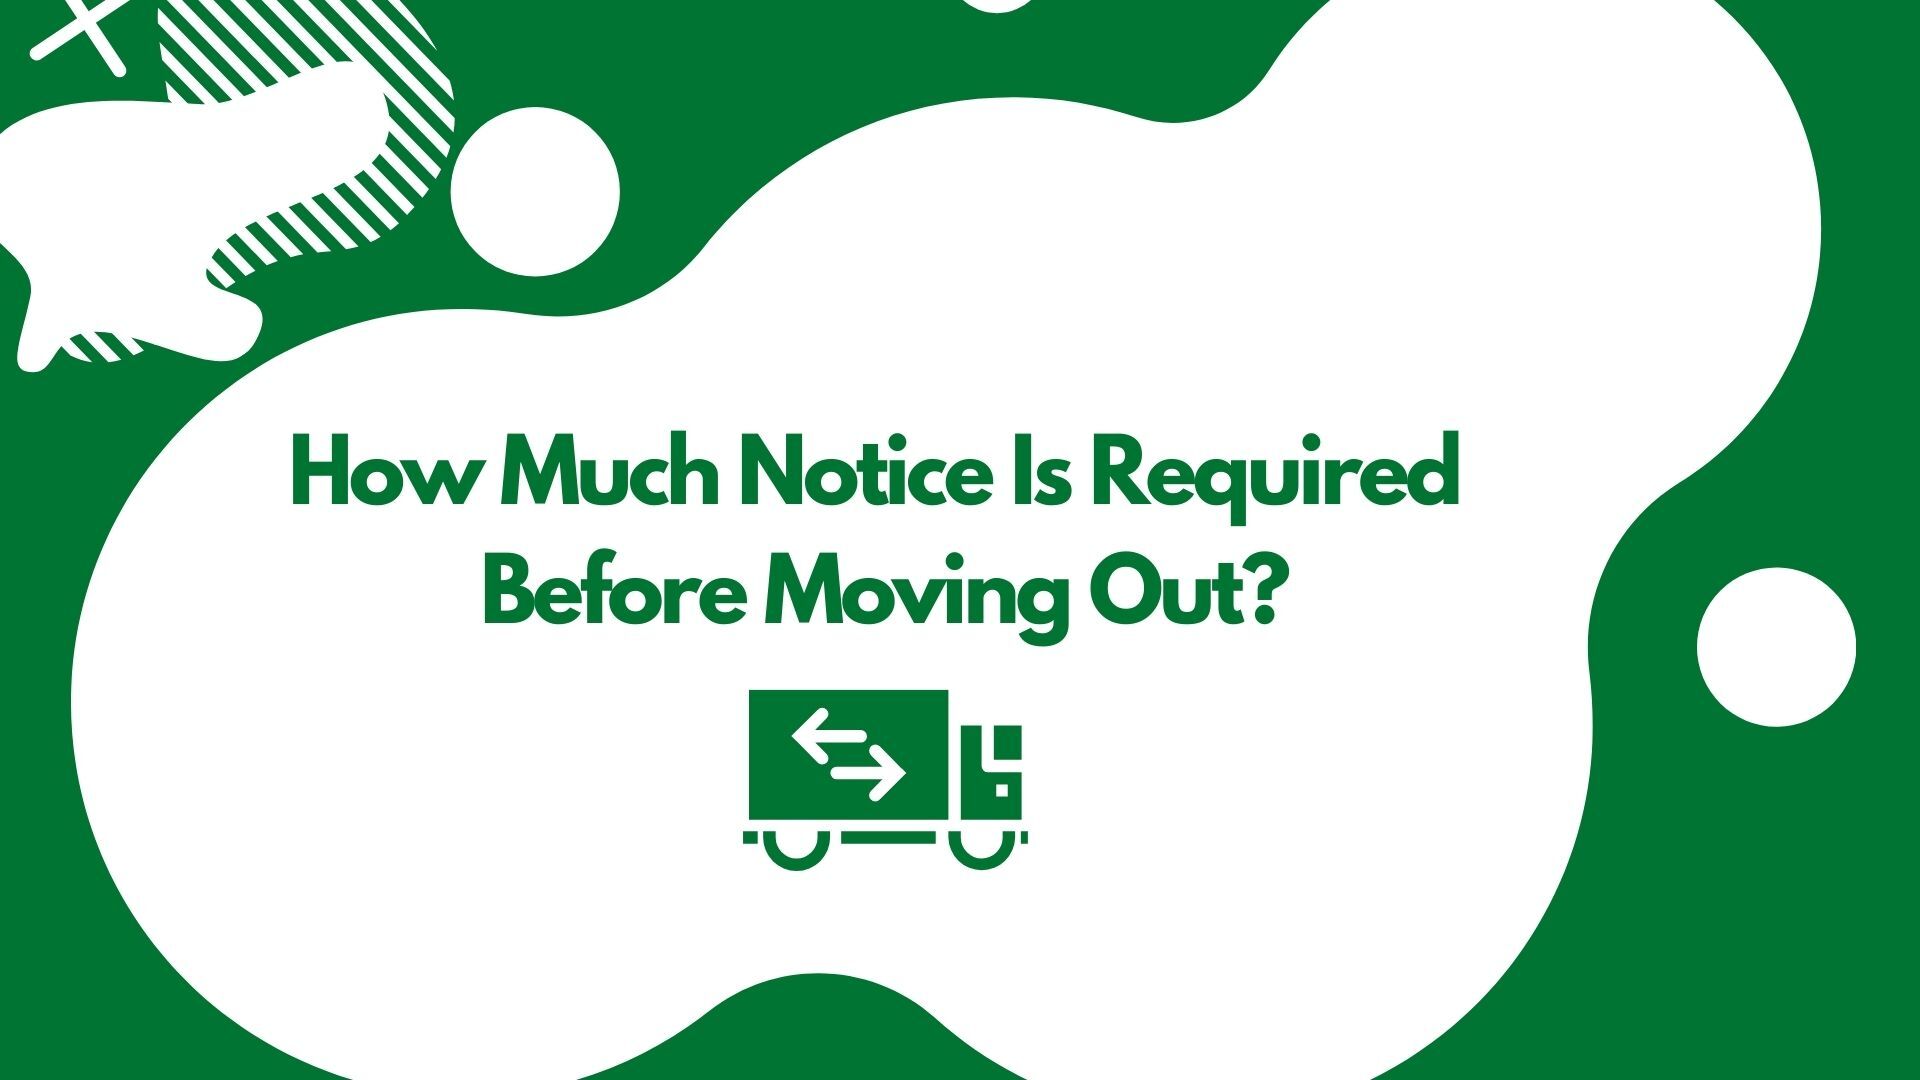 How much notice is required before moving out.